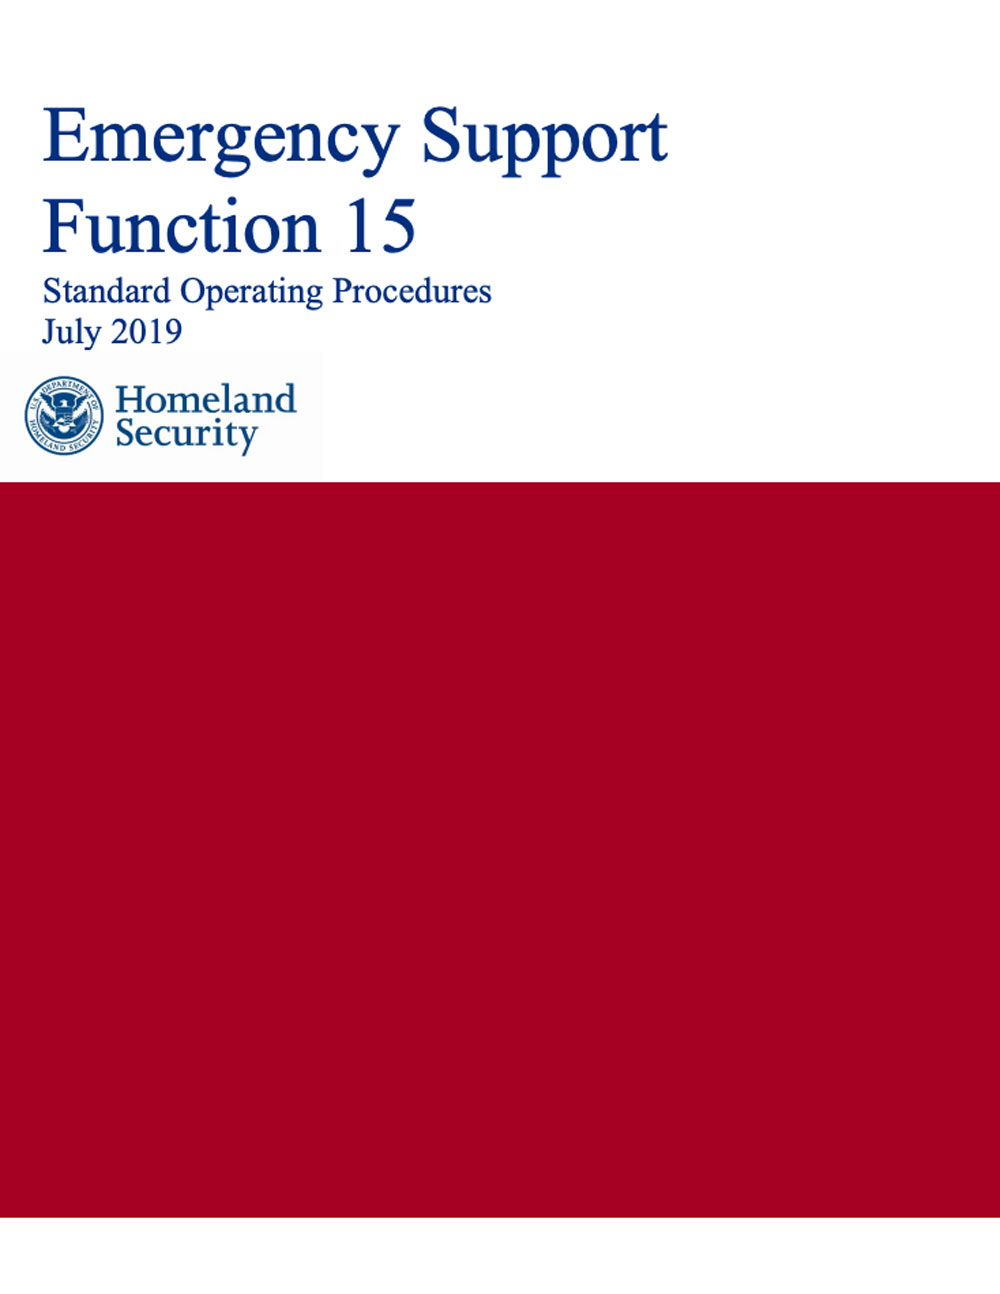 DHS Annex N to Emergency Support Function #15 External Affairs, report cover